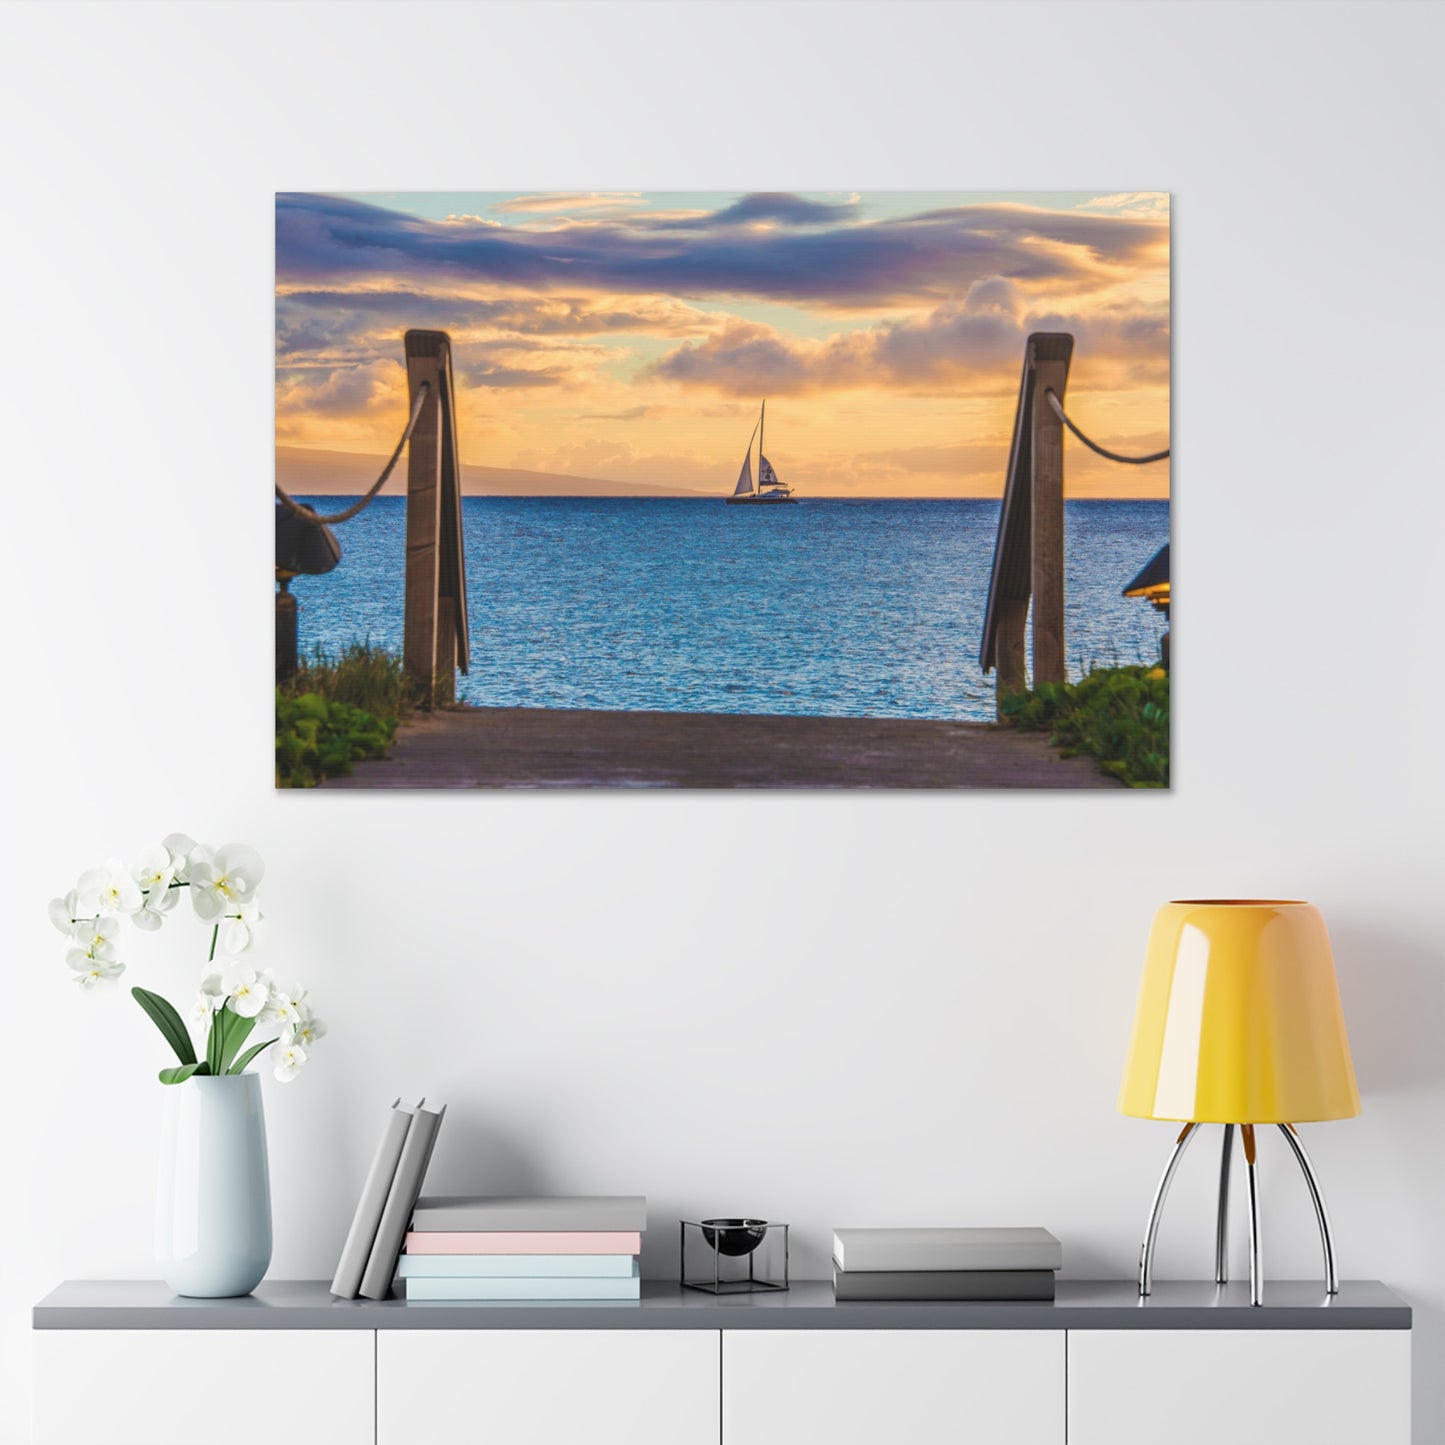 Canvas Print Of A Sailboat At Sunset in Hawaii For Wall Art